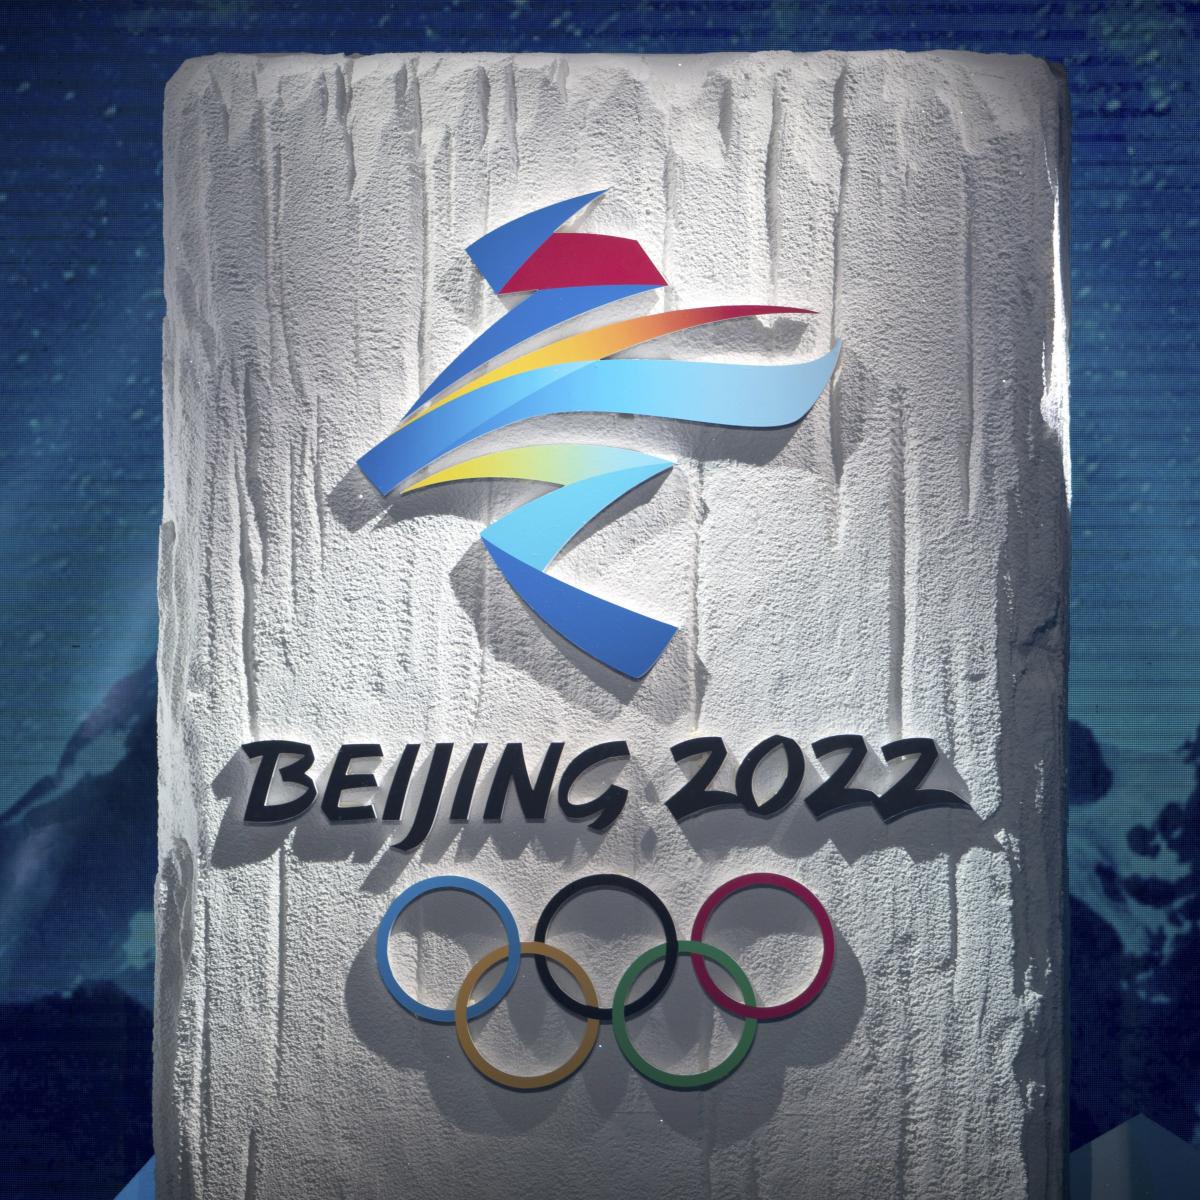 2022 Olympics: Beijing Winter Games Schedule and Possible New Events